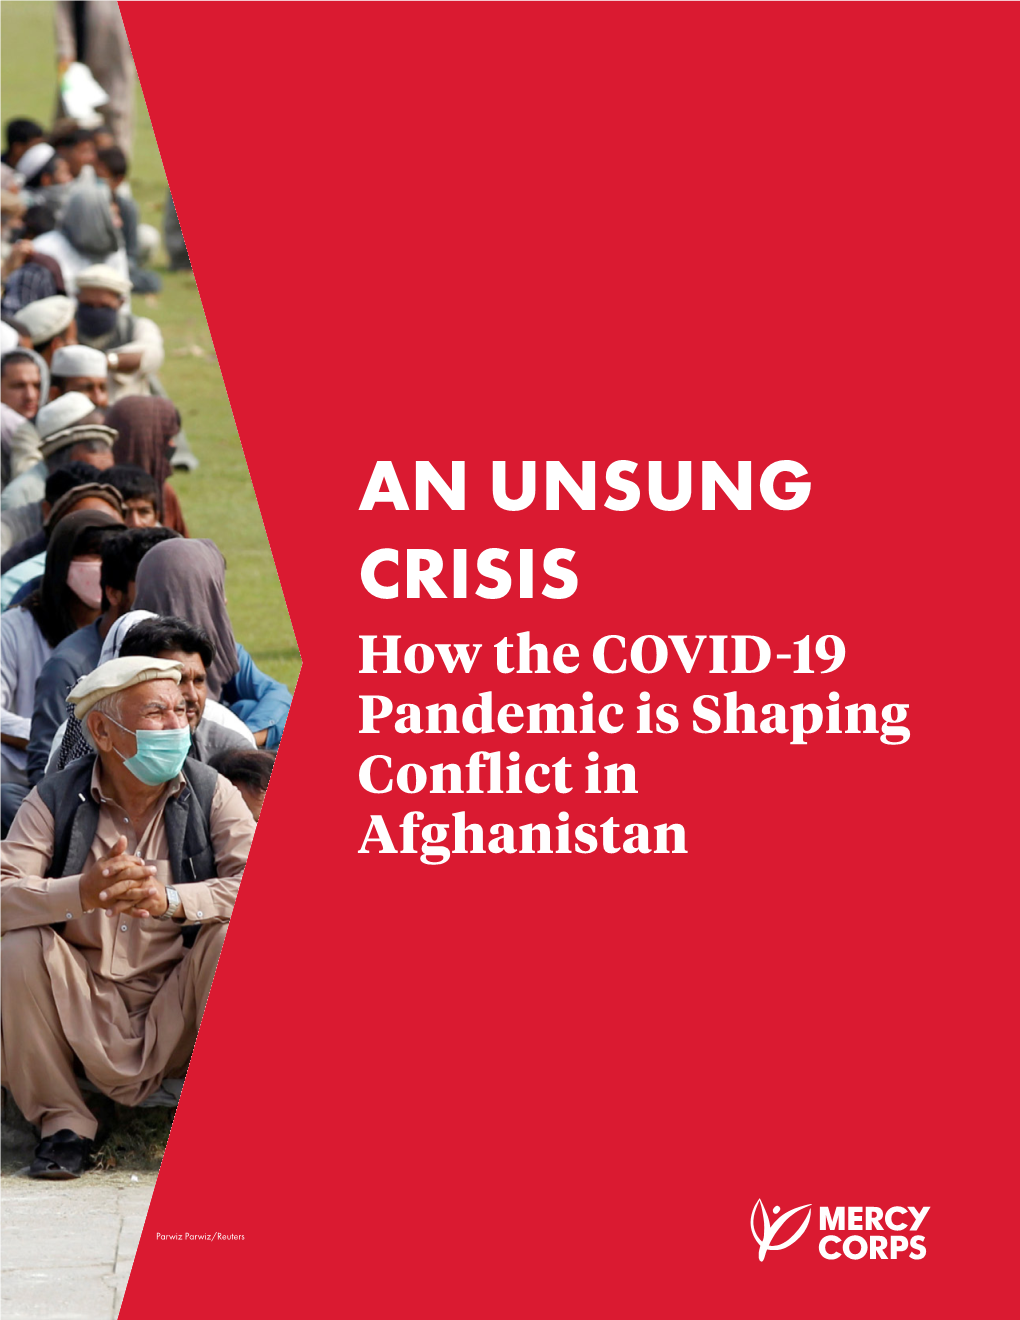 AN UNSUNG CRISIS How the COVID-19 Pandemic Is Shaping Conflict in Afghanistan